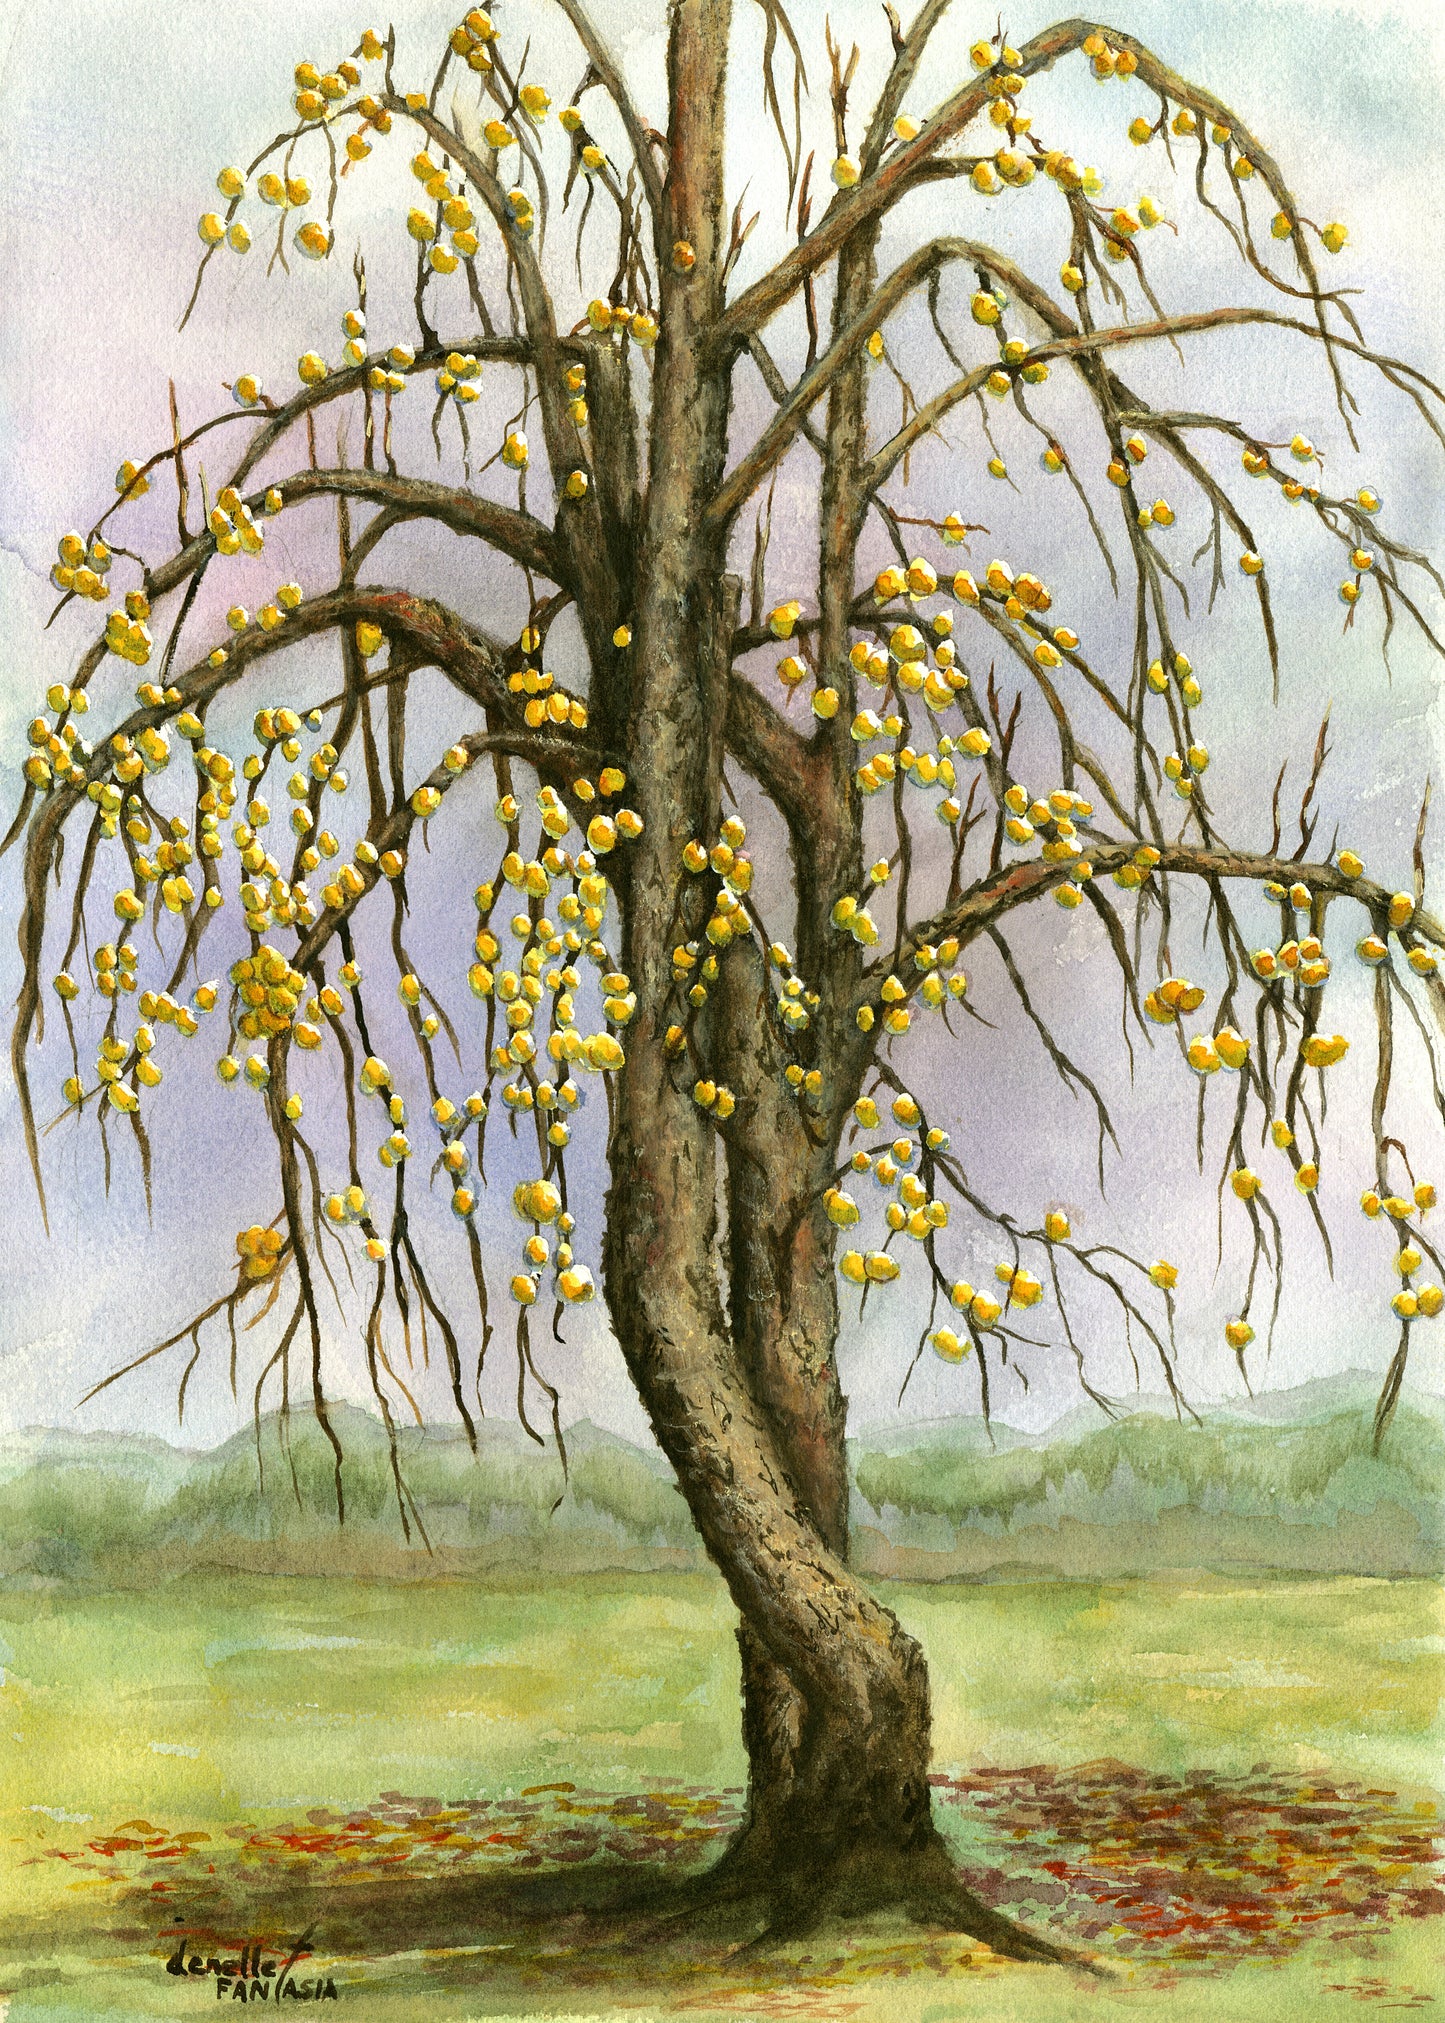 This tree was inspired by the passage in Matt 9:37,38 "The harvest is plentiful but the workers are few. Ask the Lord of the harvest, therefore, to send out workers into his harvest field."